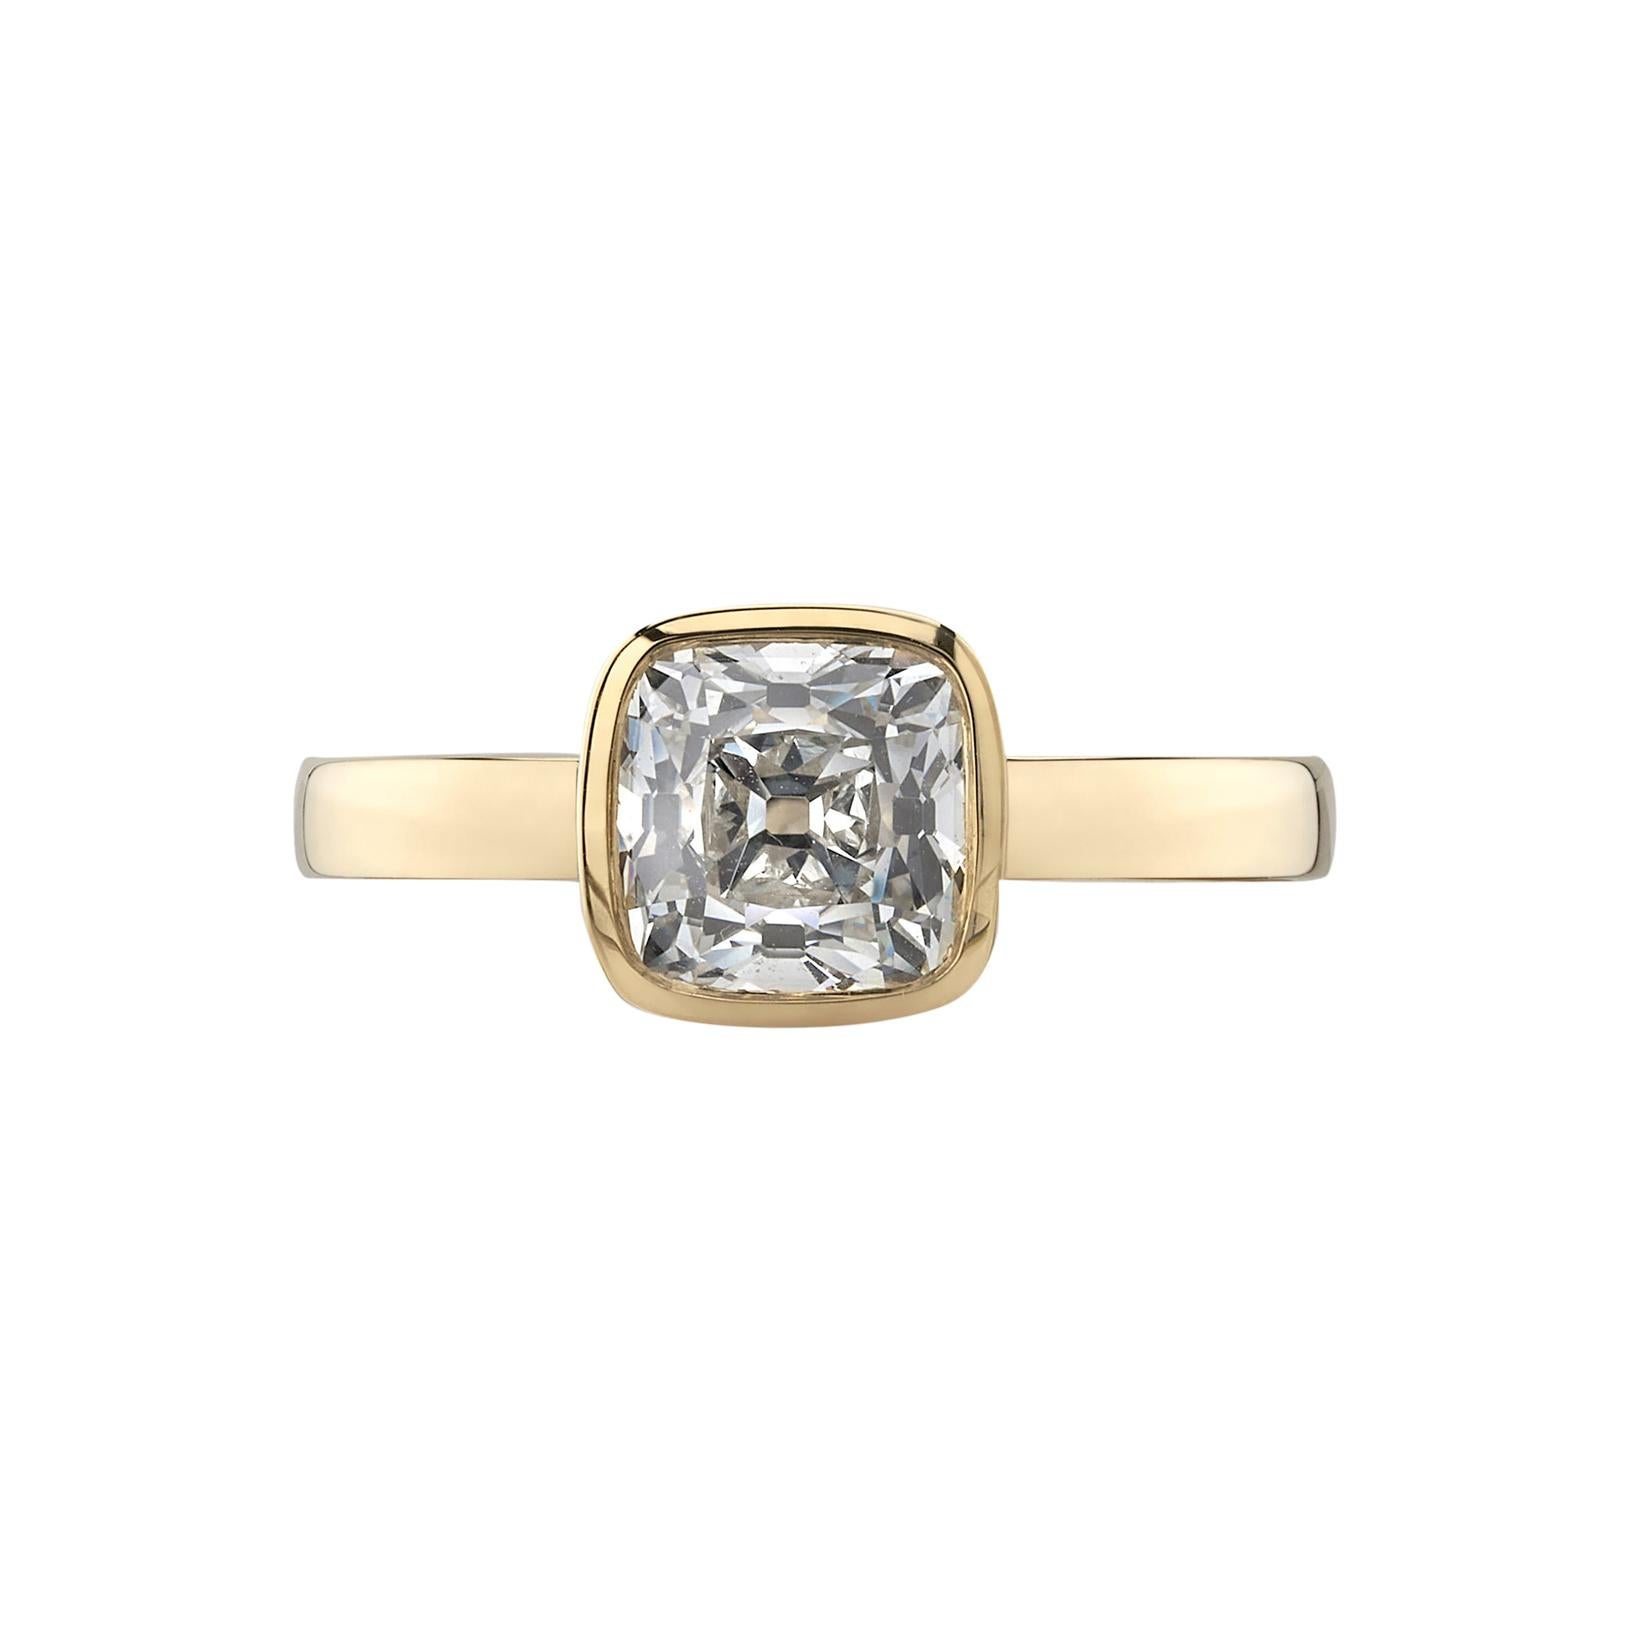 Handcrafted Wyler Antique Cushion Cut Diamond Ring by Single Stone For Sale